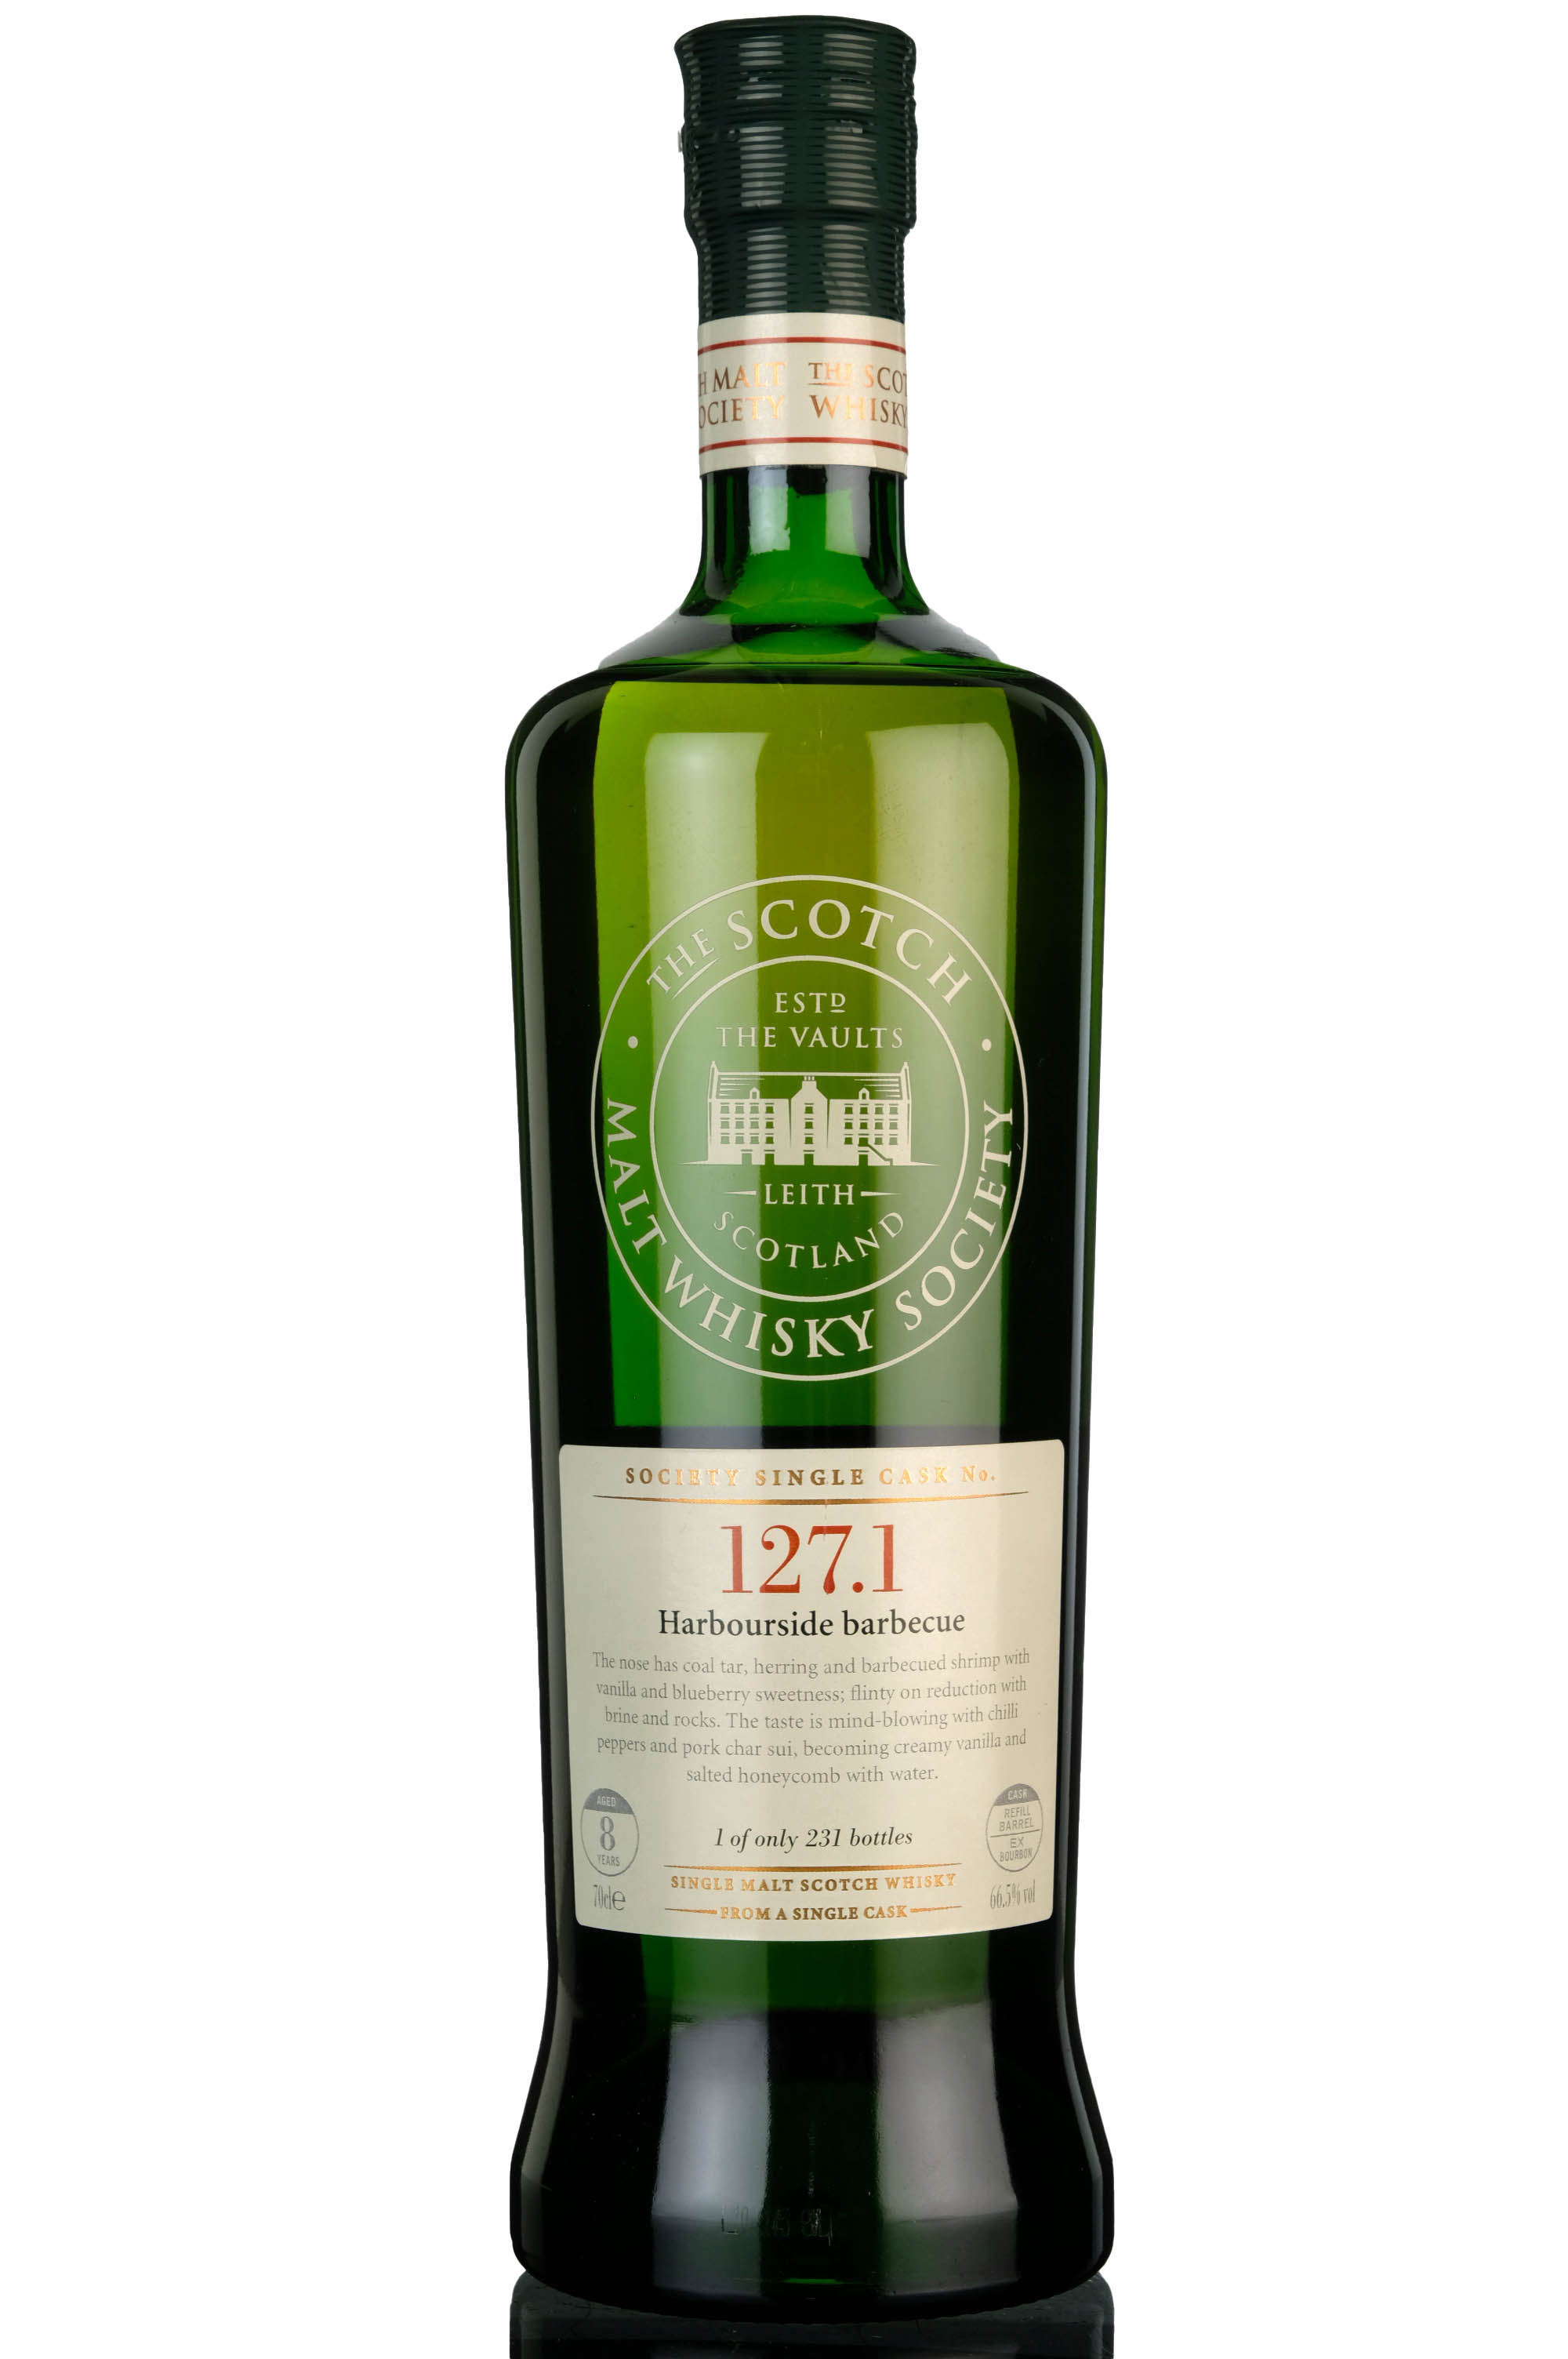 Port Charlotte 2001-2010 - 8 Year Old - SMWS 127.1 - Harbourside Barbecue